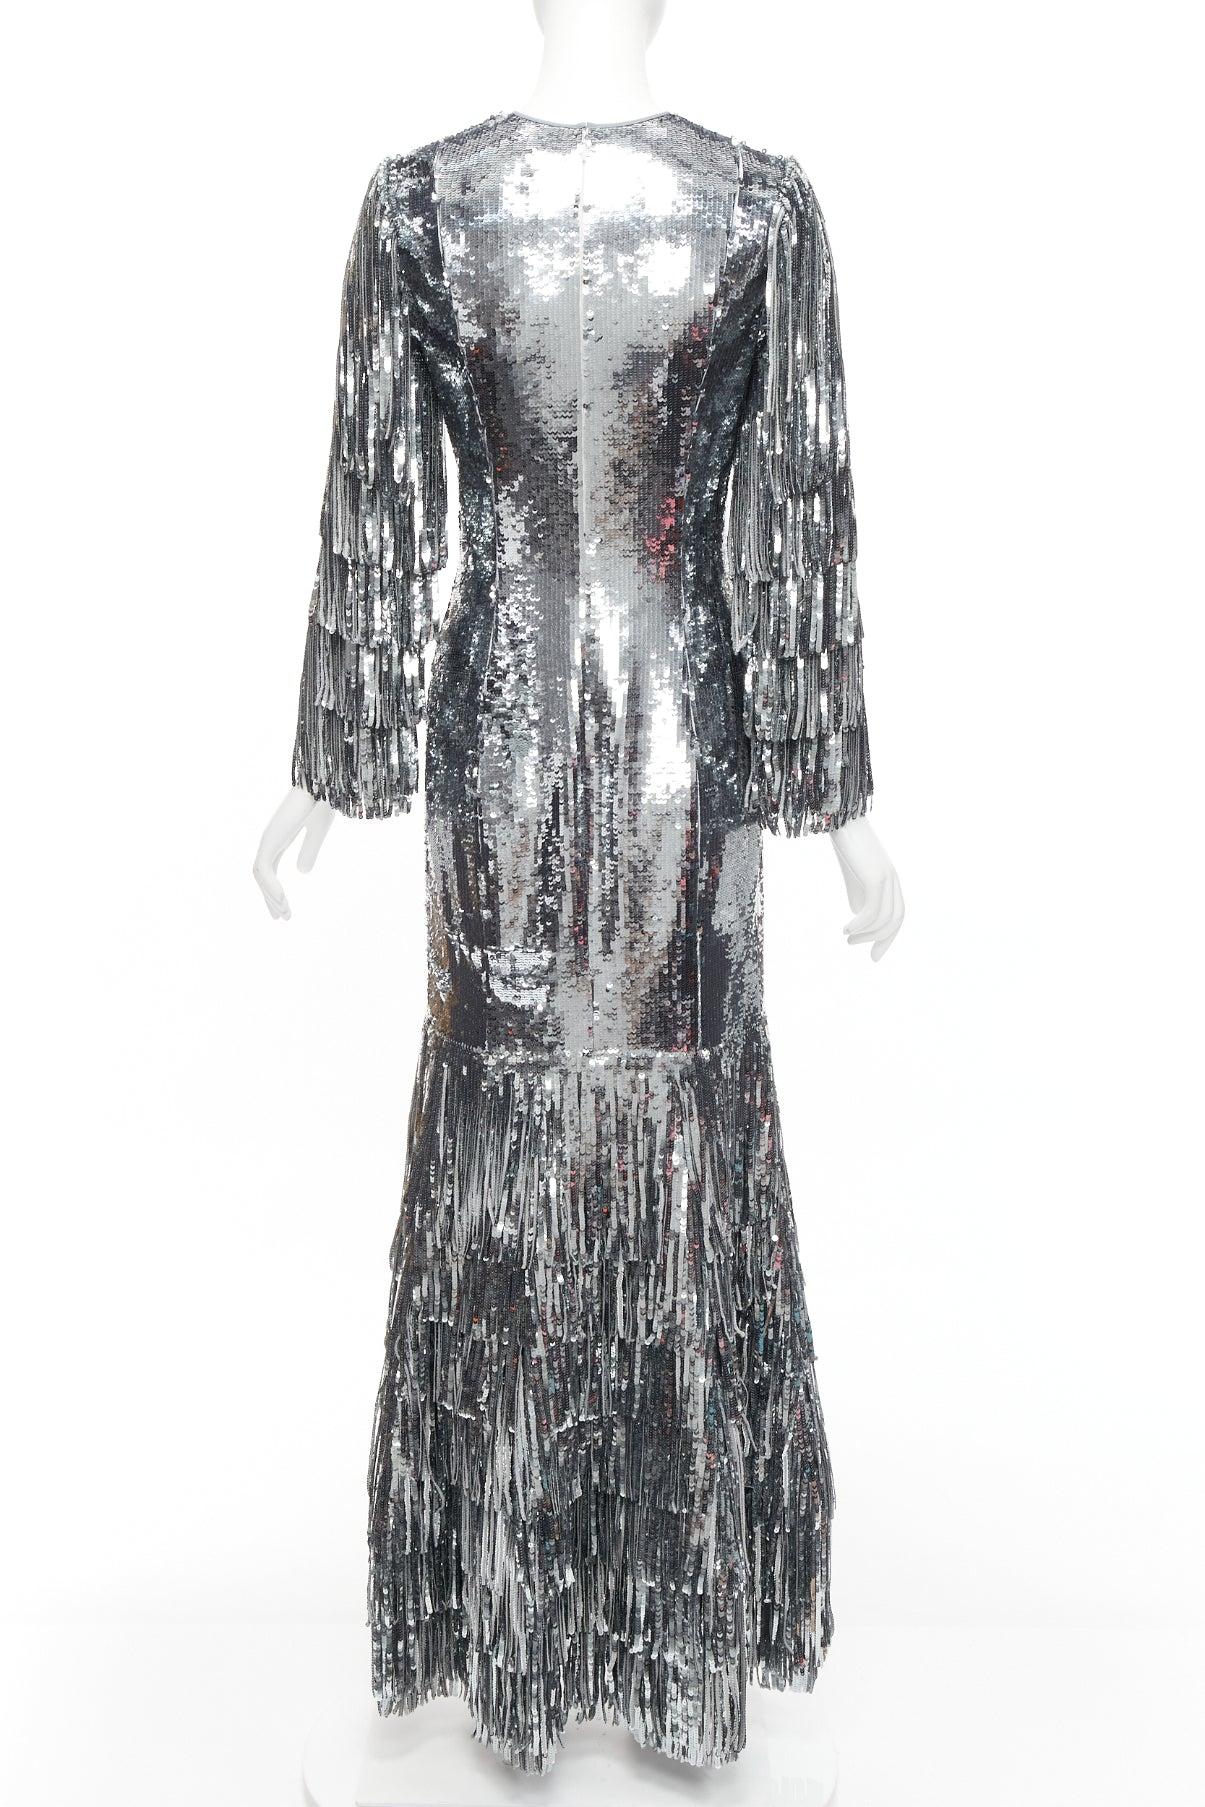 Women's HUISHAN ZHANG silver sequins fringe detail silk lined mermaid gown dress UK6 XS For Sale